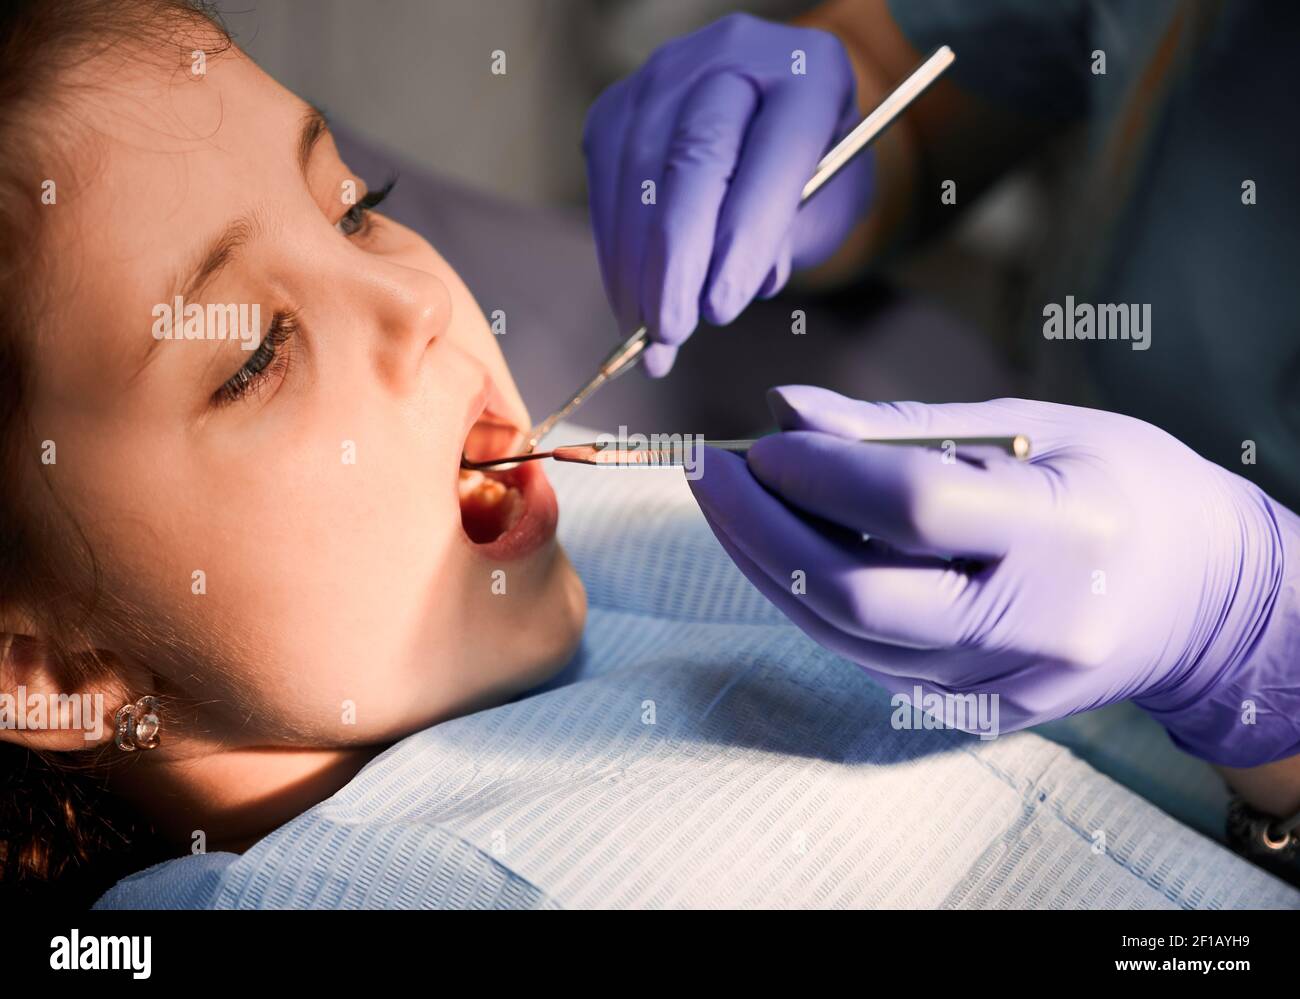 Close up of girl patient with open mouth while dentist checking kid teeth. Stomatologist examining child teeth with dental explorer and mirror. Concept of pediatric dentistry and dental care. Stock Photo